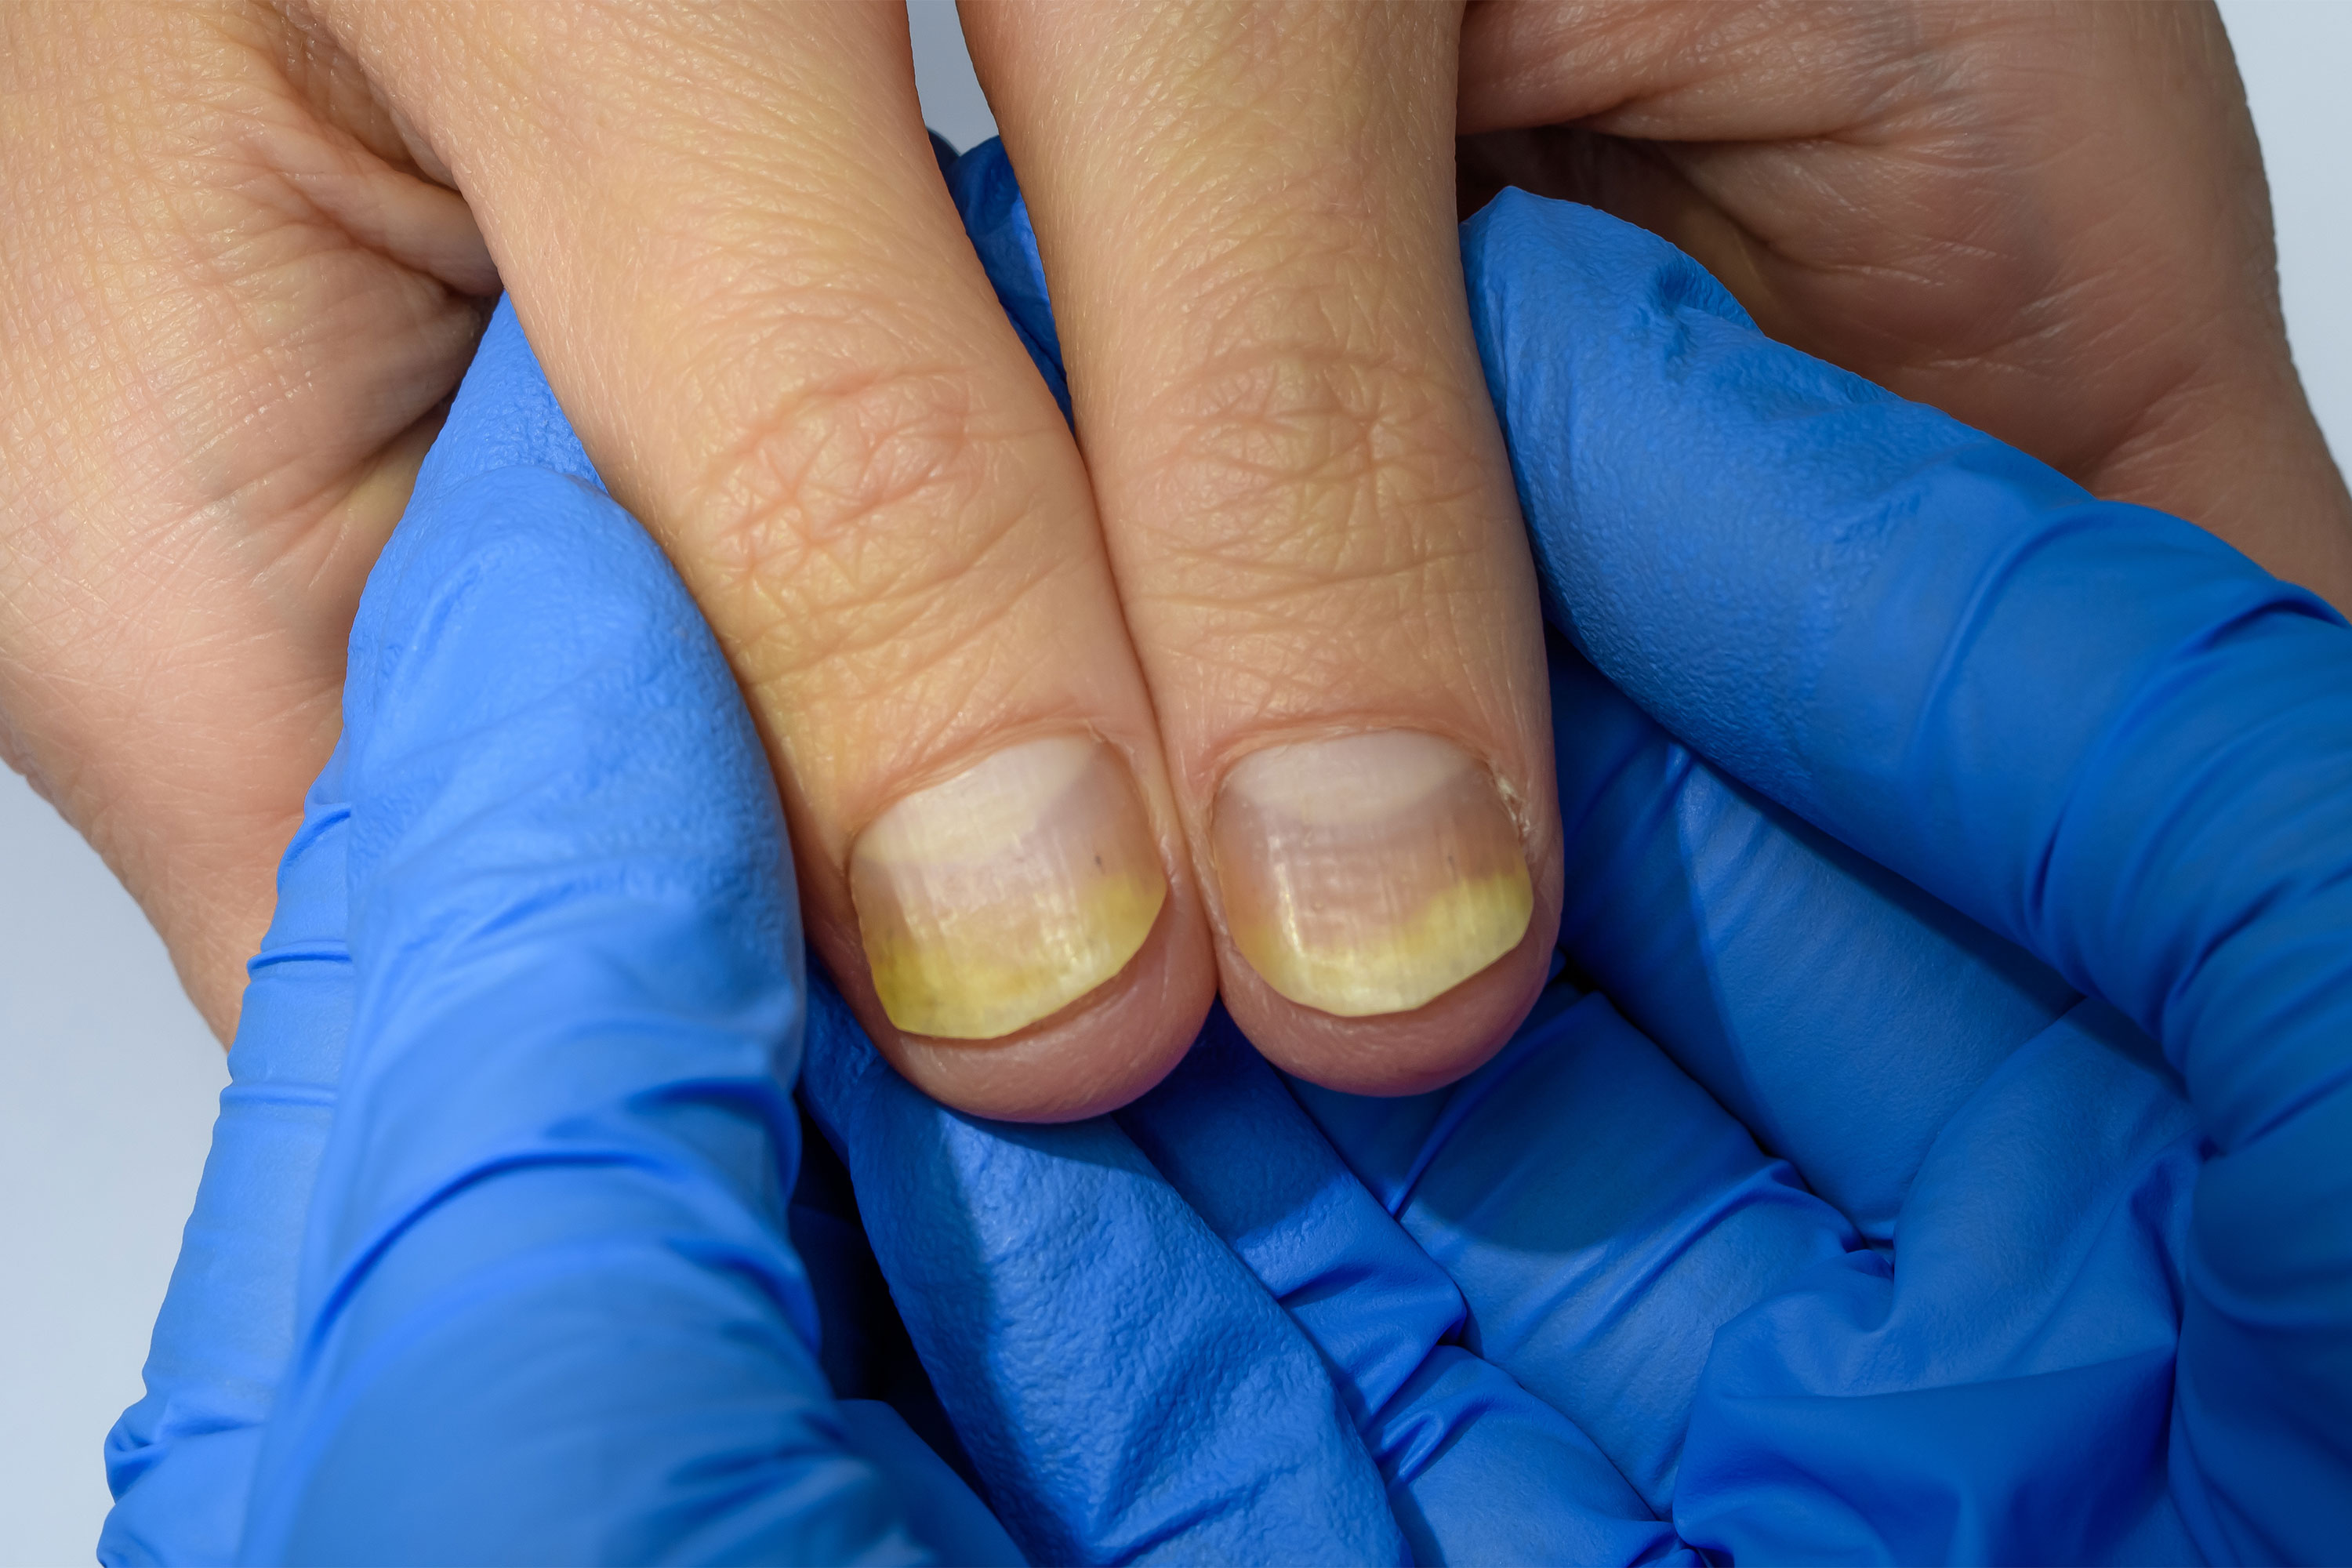 How to Care for Your Nails at Home with Psoriasis or Psoriatic Arthritis